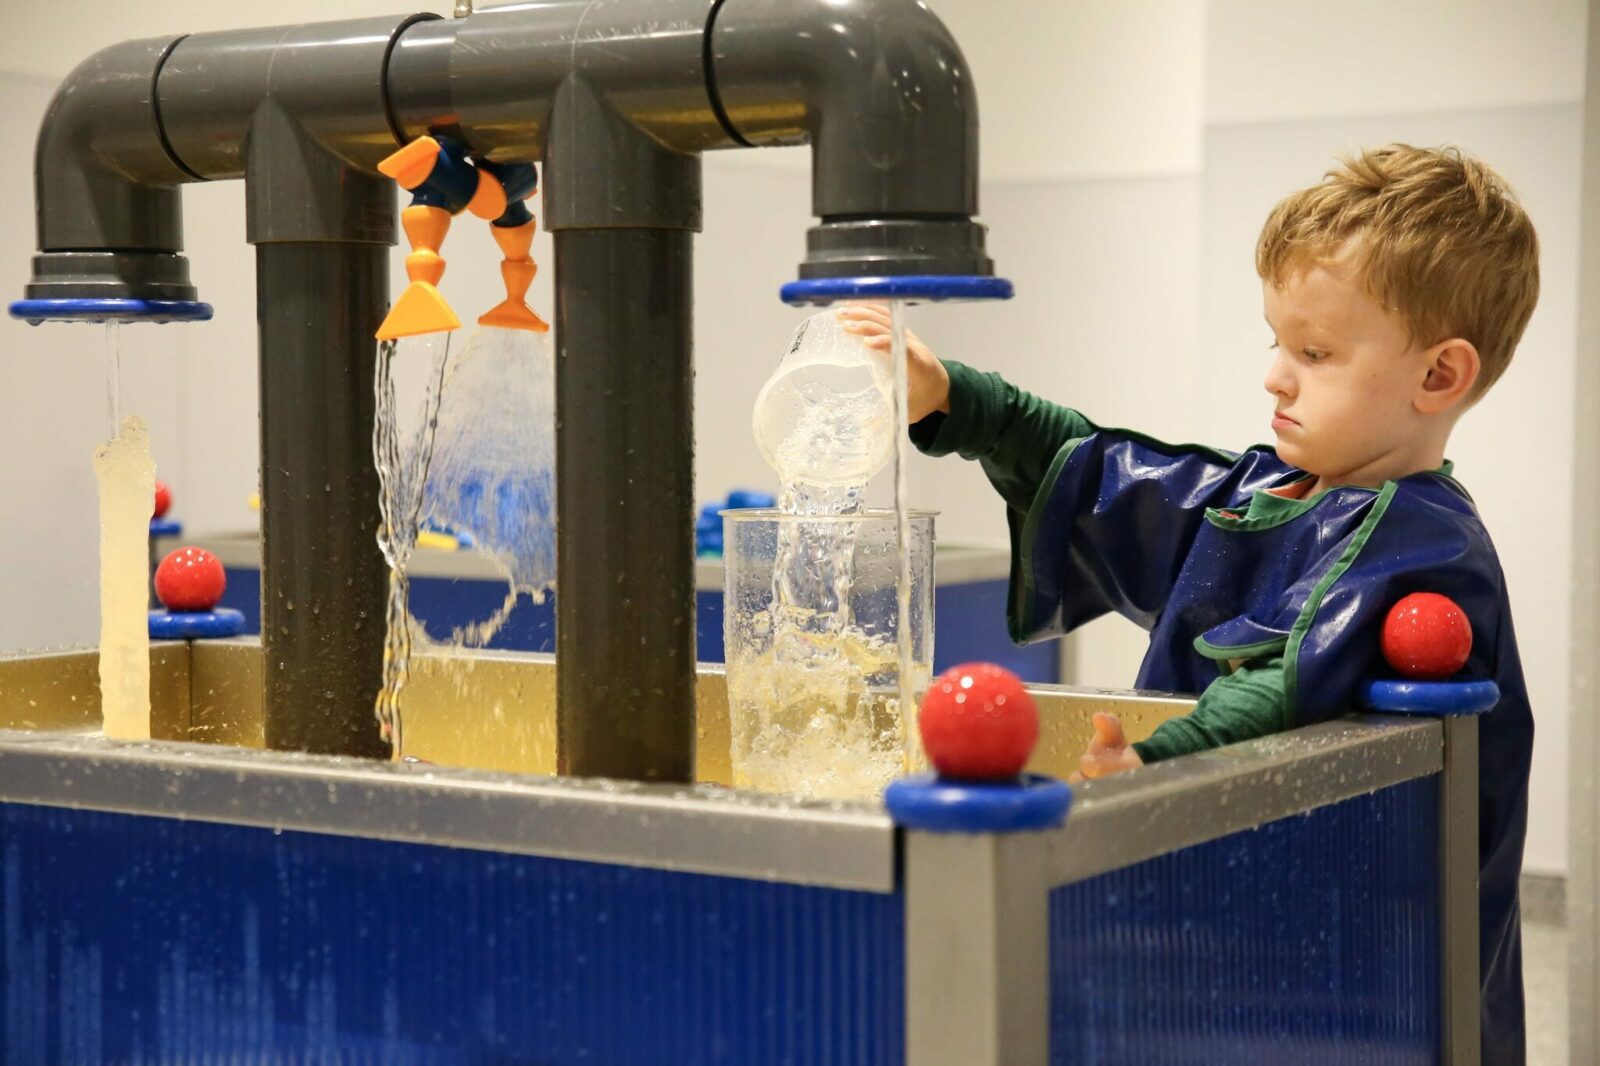 Discovery Museum Where kids explore science and nature through play